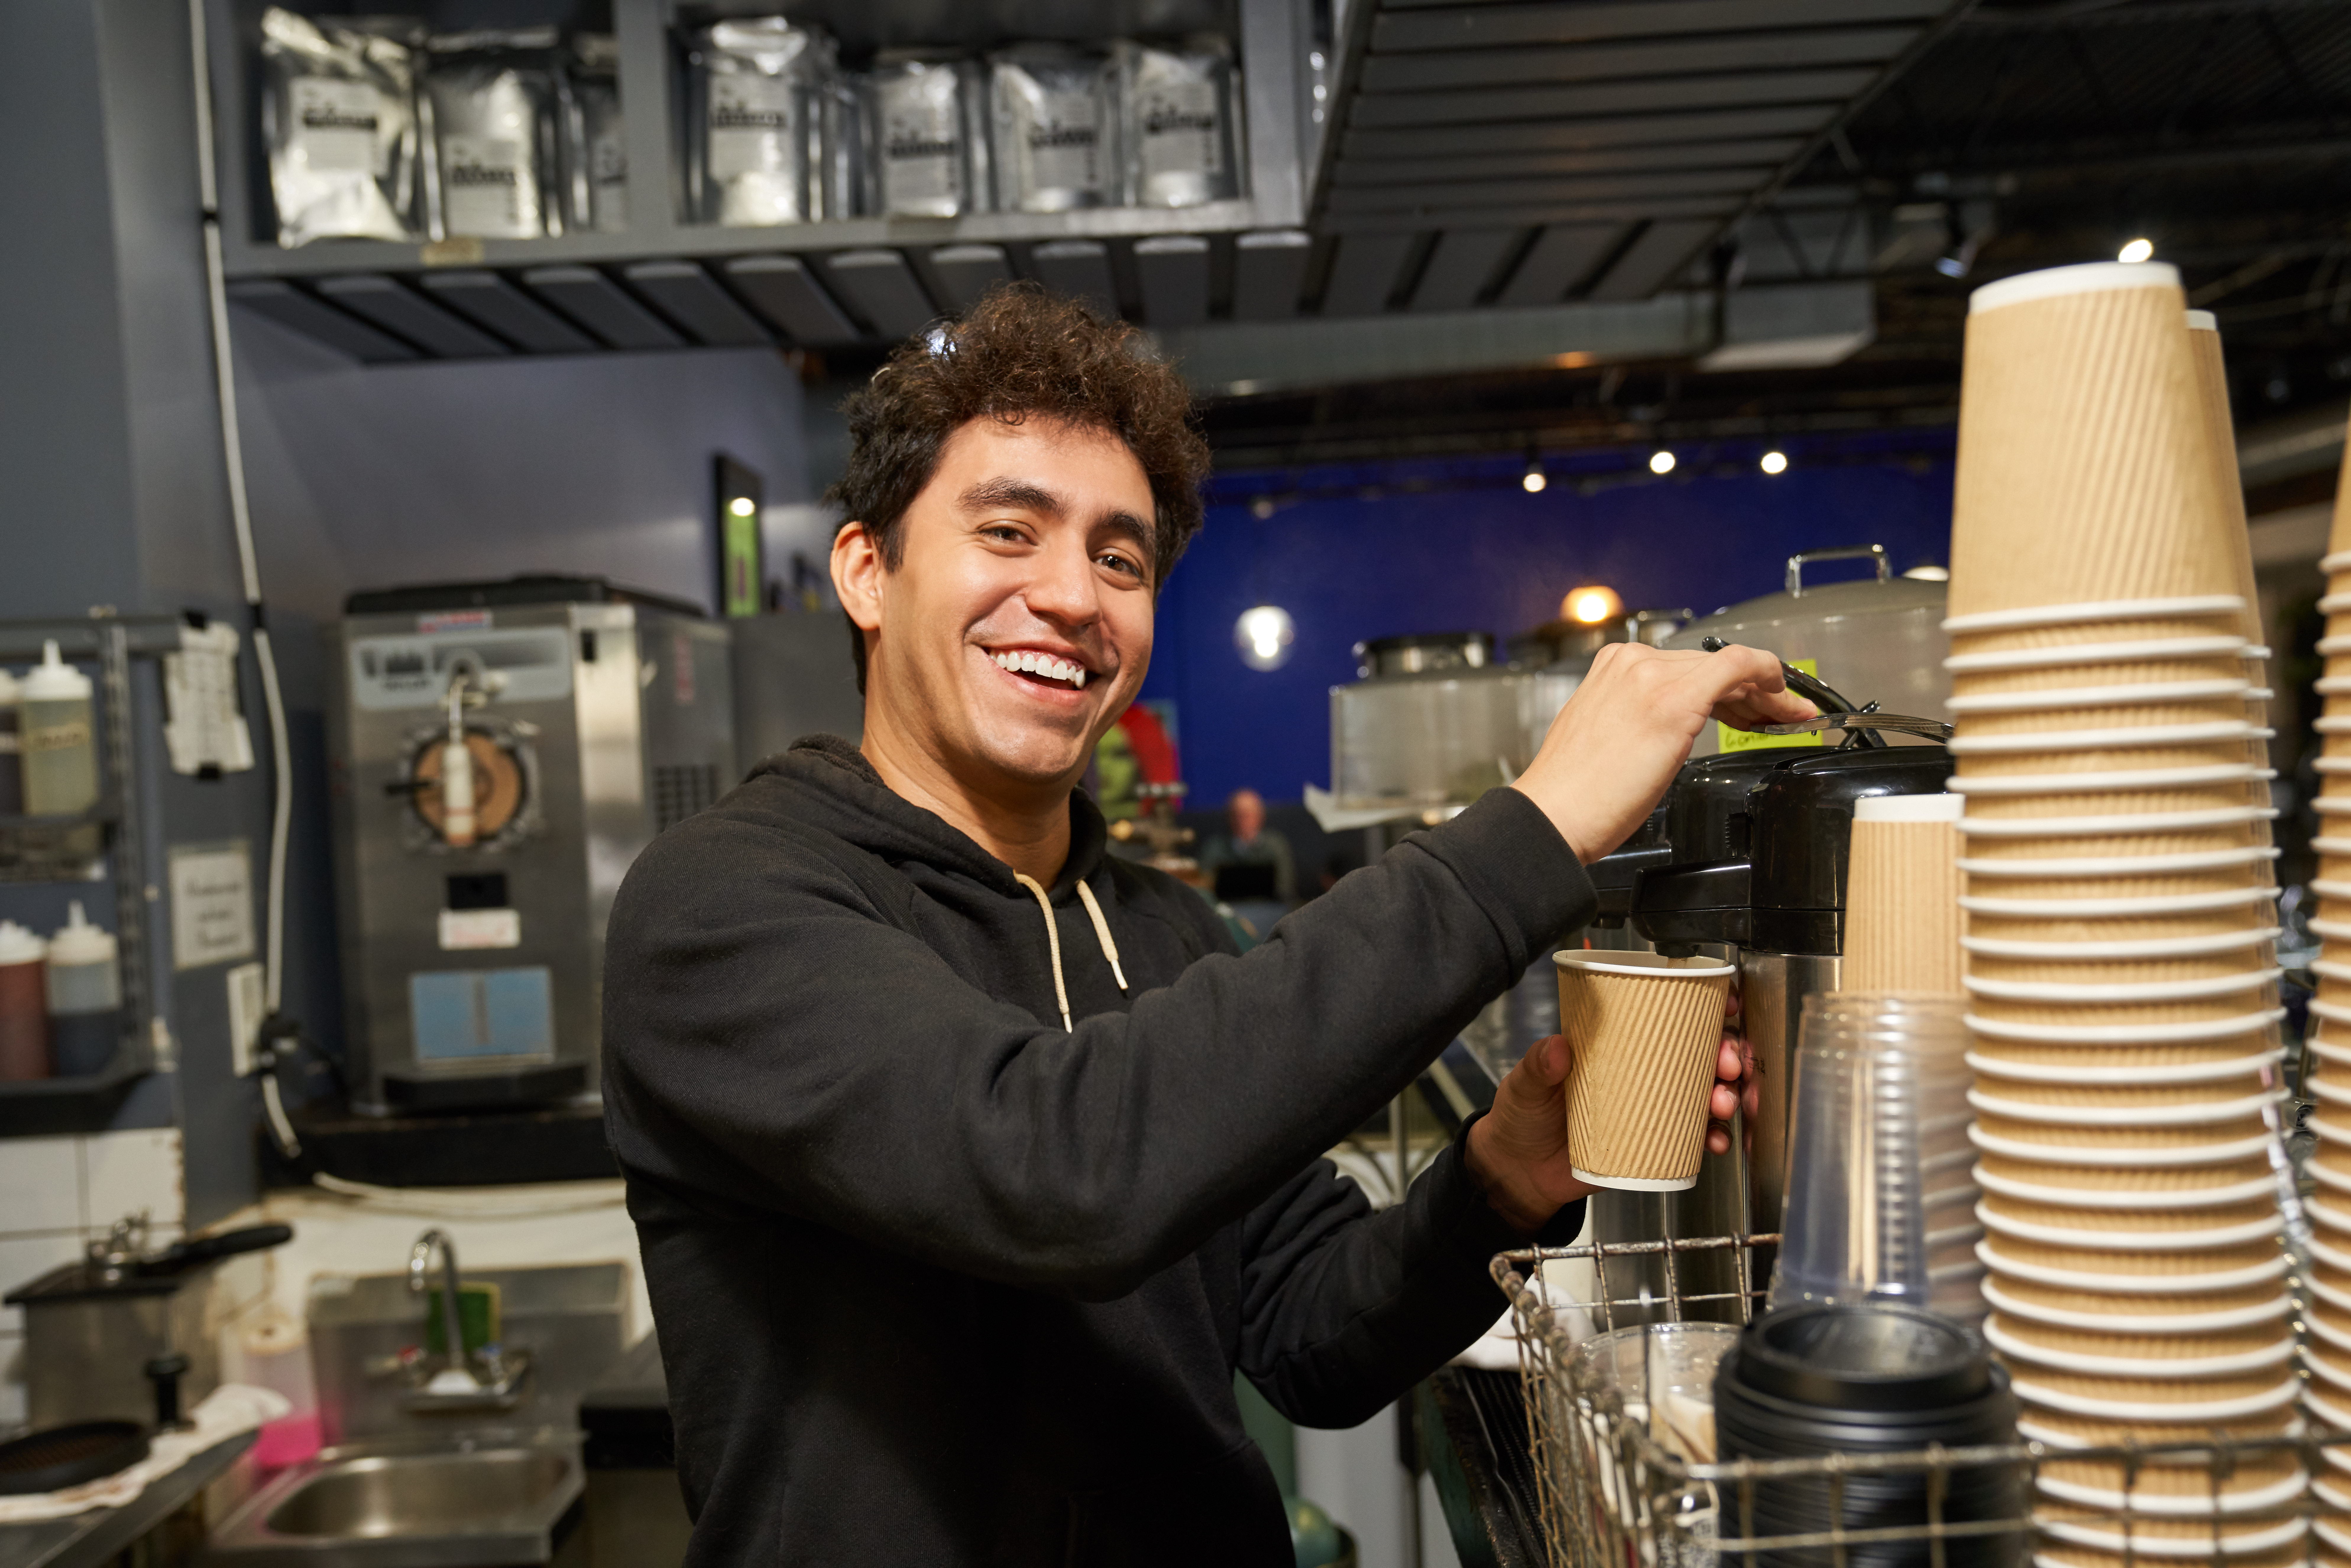 Man making coffee in coffee shop and smiling at camera